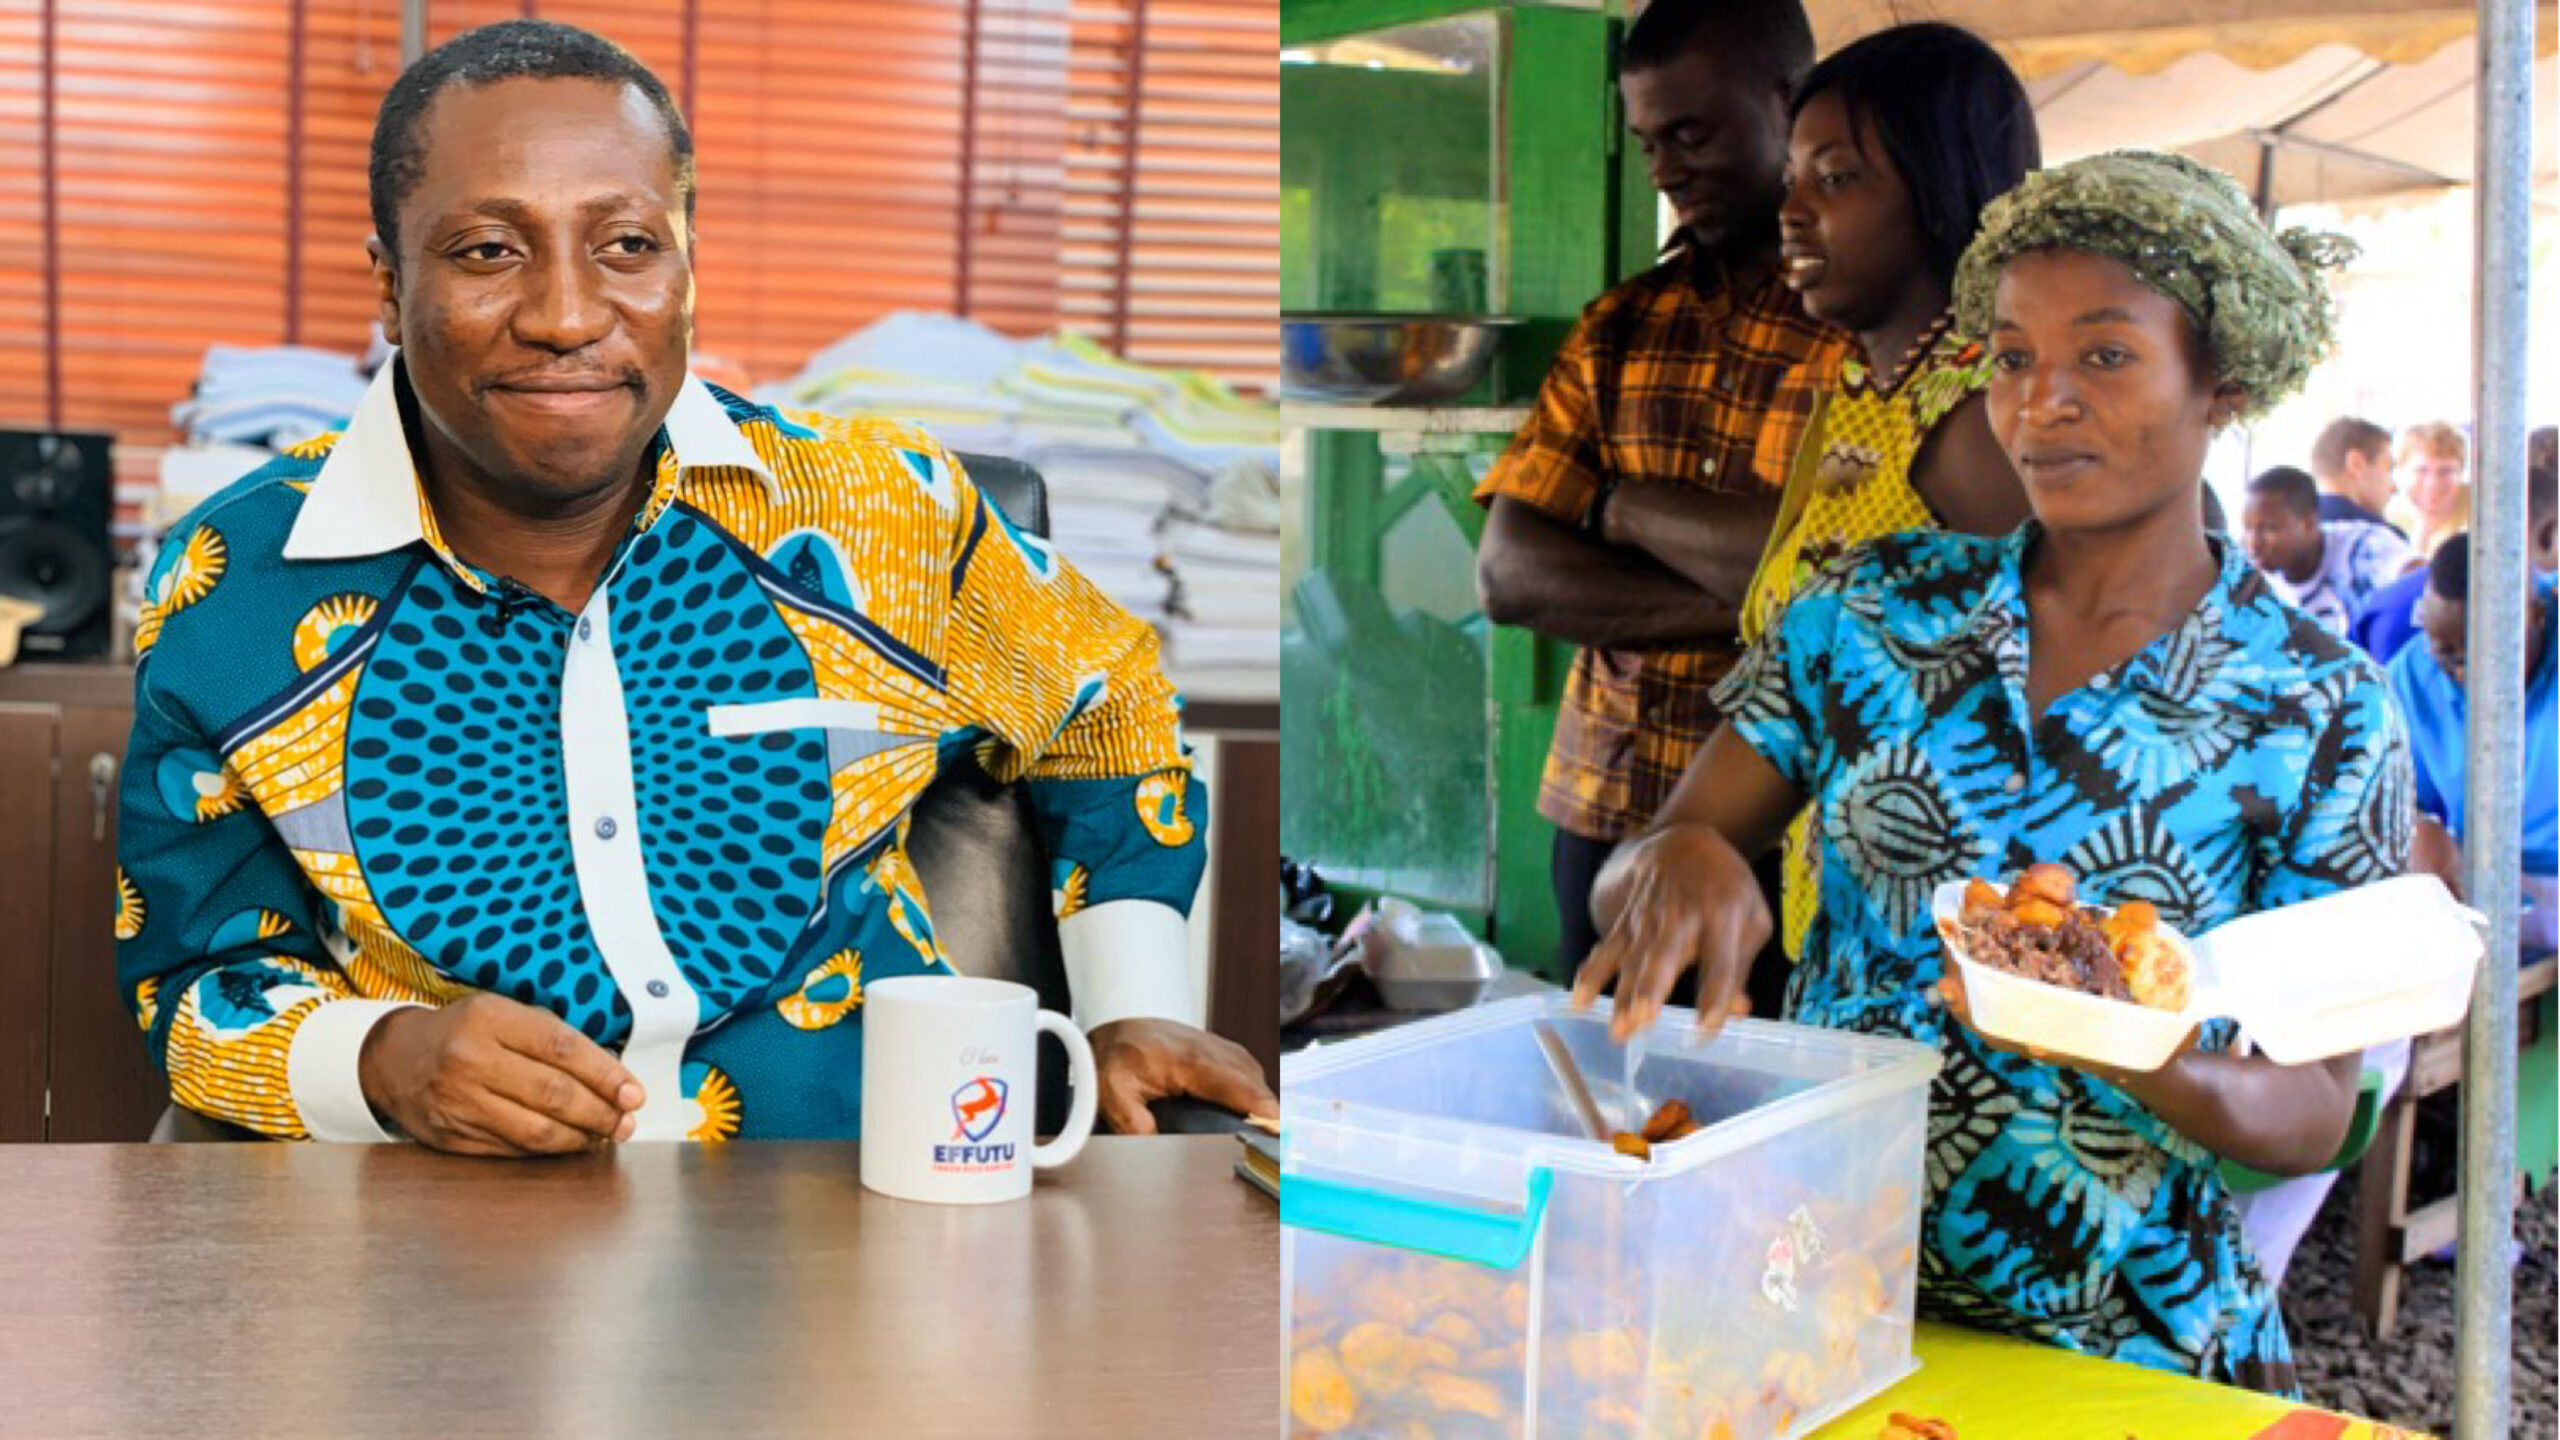 My Experience At "Waakye" Joint Has Taught Me How Ghanaians Are Suffering; We Have To Do Better – NPP MP Afenyo-Markin Recounts